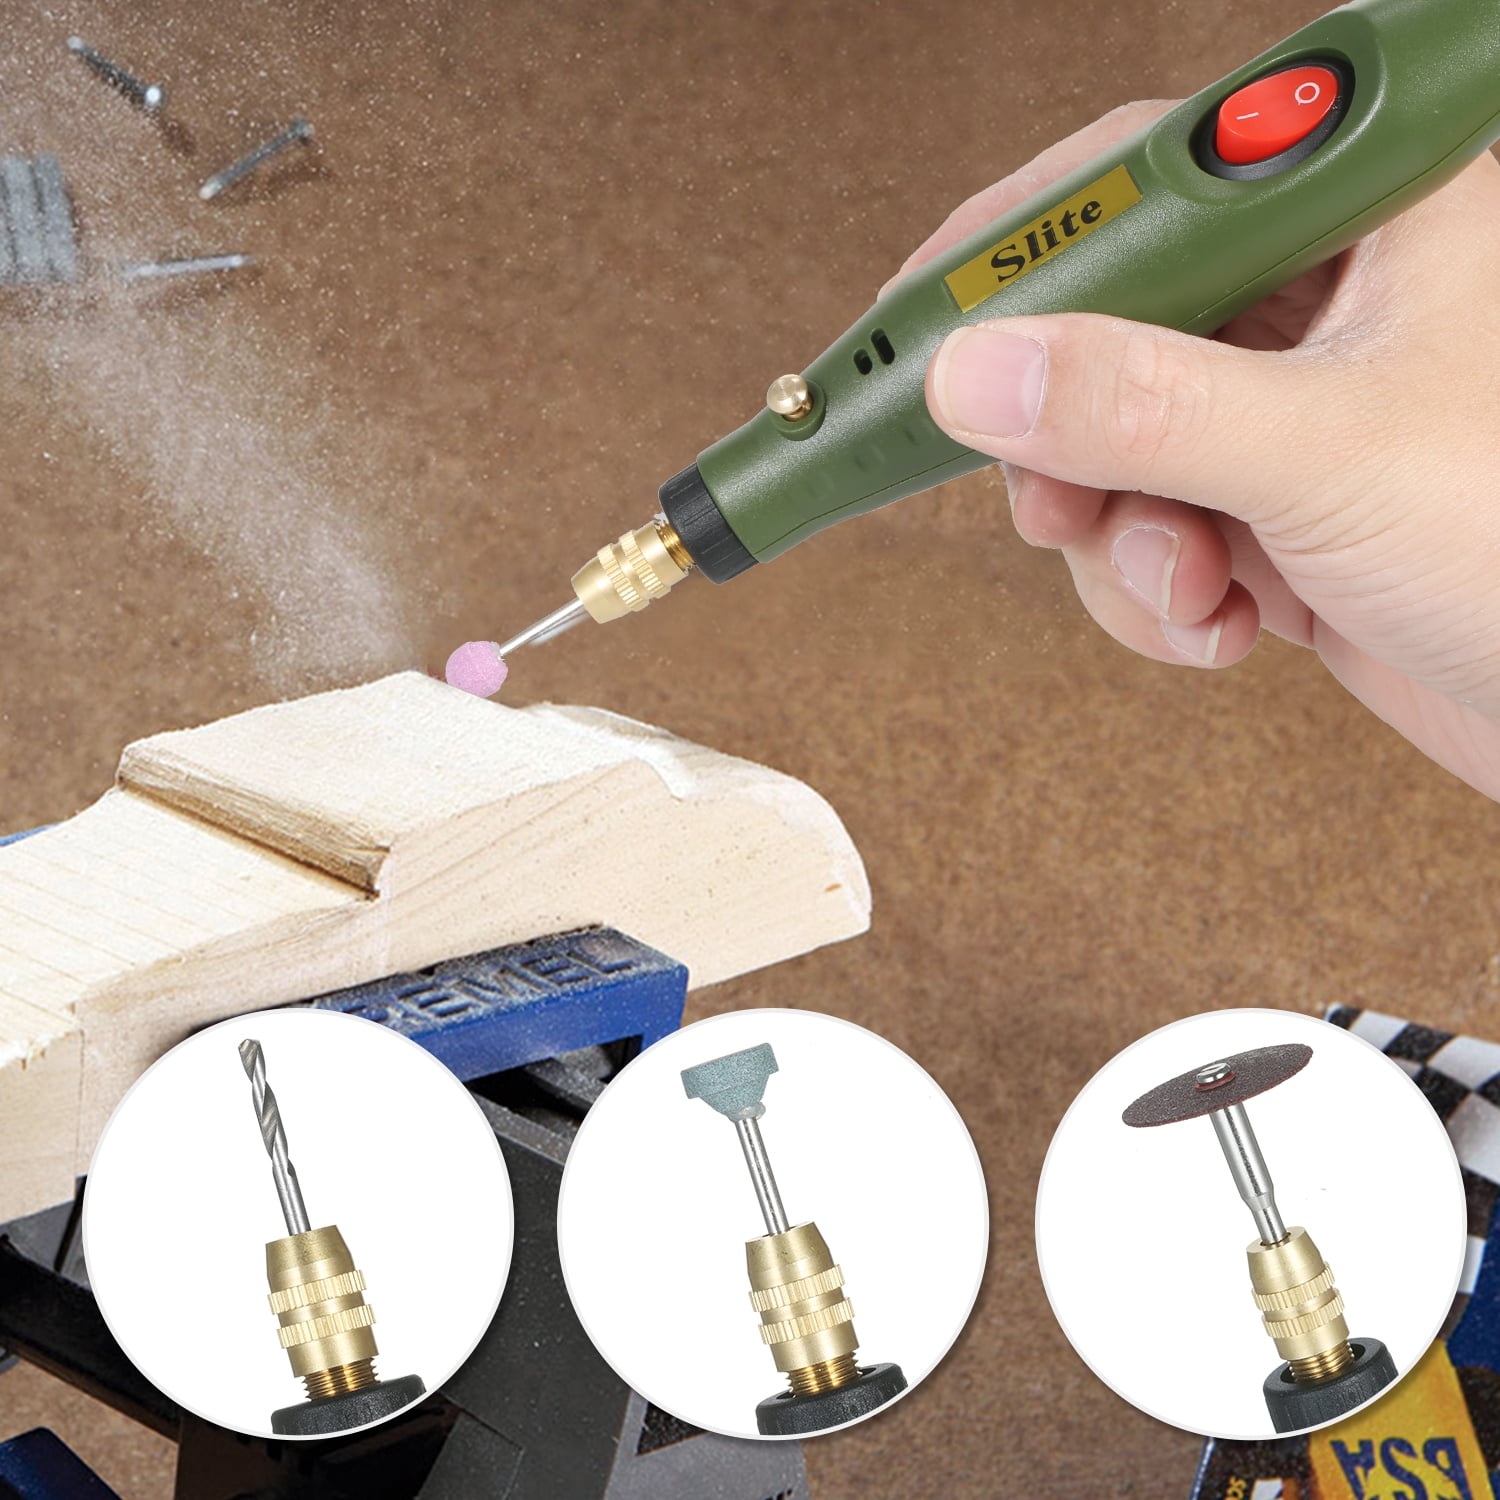 Electric Rotary Tool Kit, SPTA Mini Electric Grinder Set Mini Handle  Electric Drill Grinding Engraving Pen Milling Trimming Polishing Drilling  Cutting